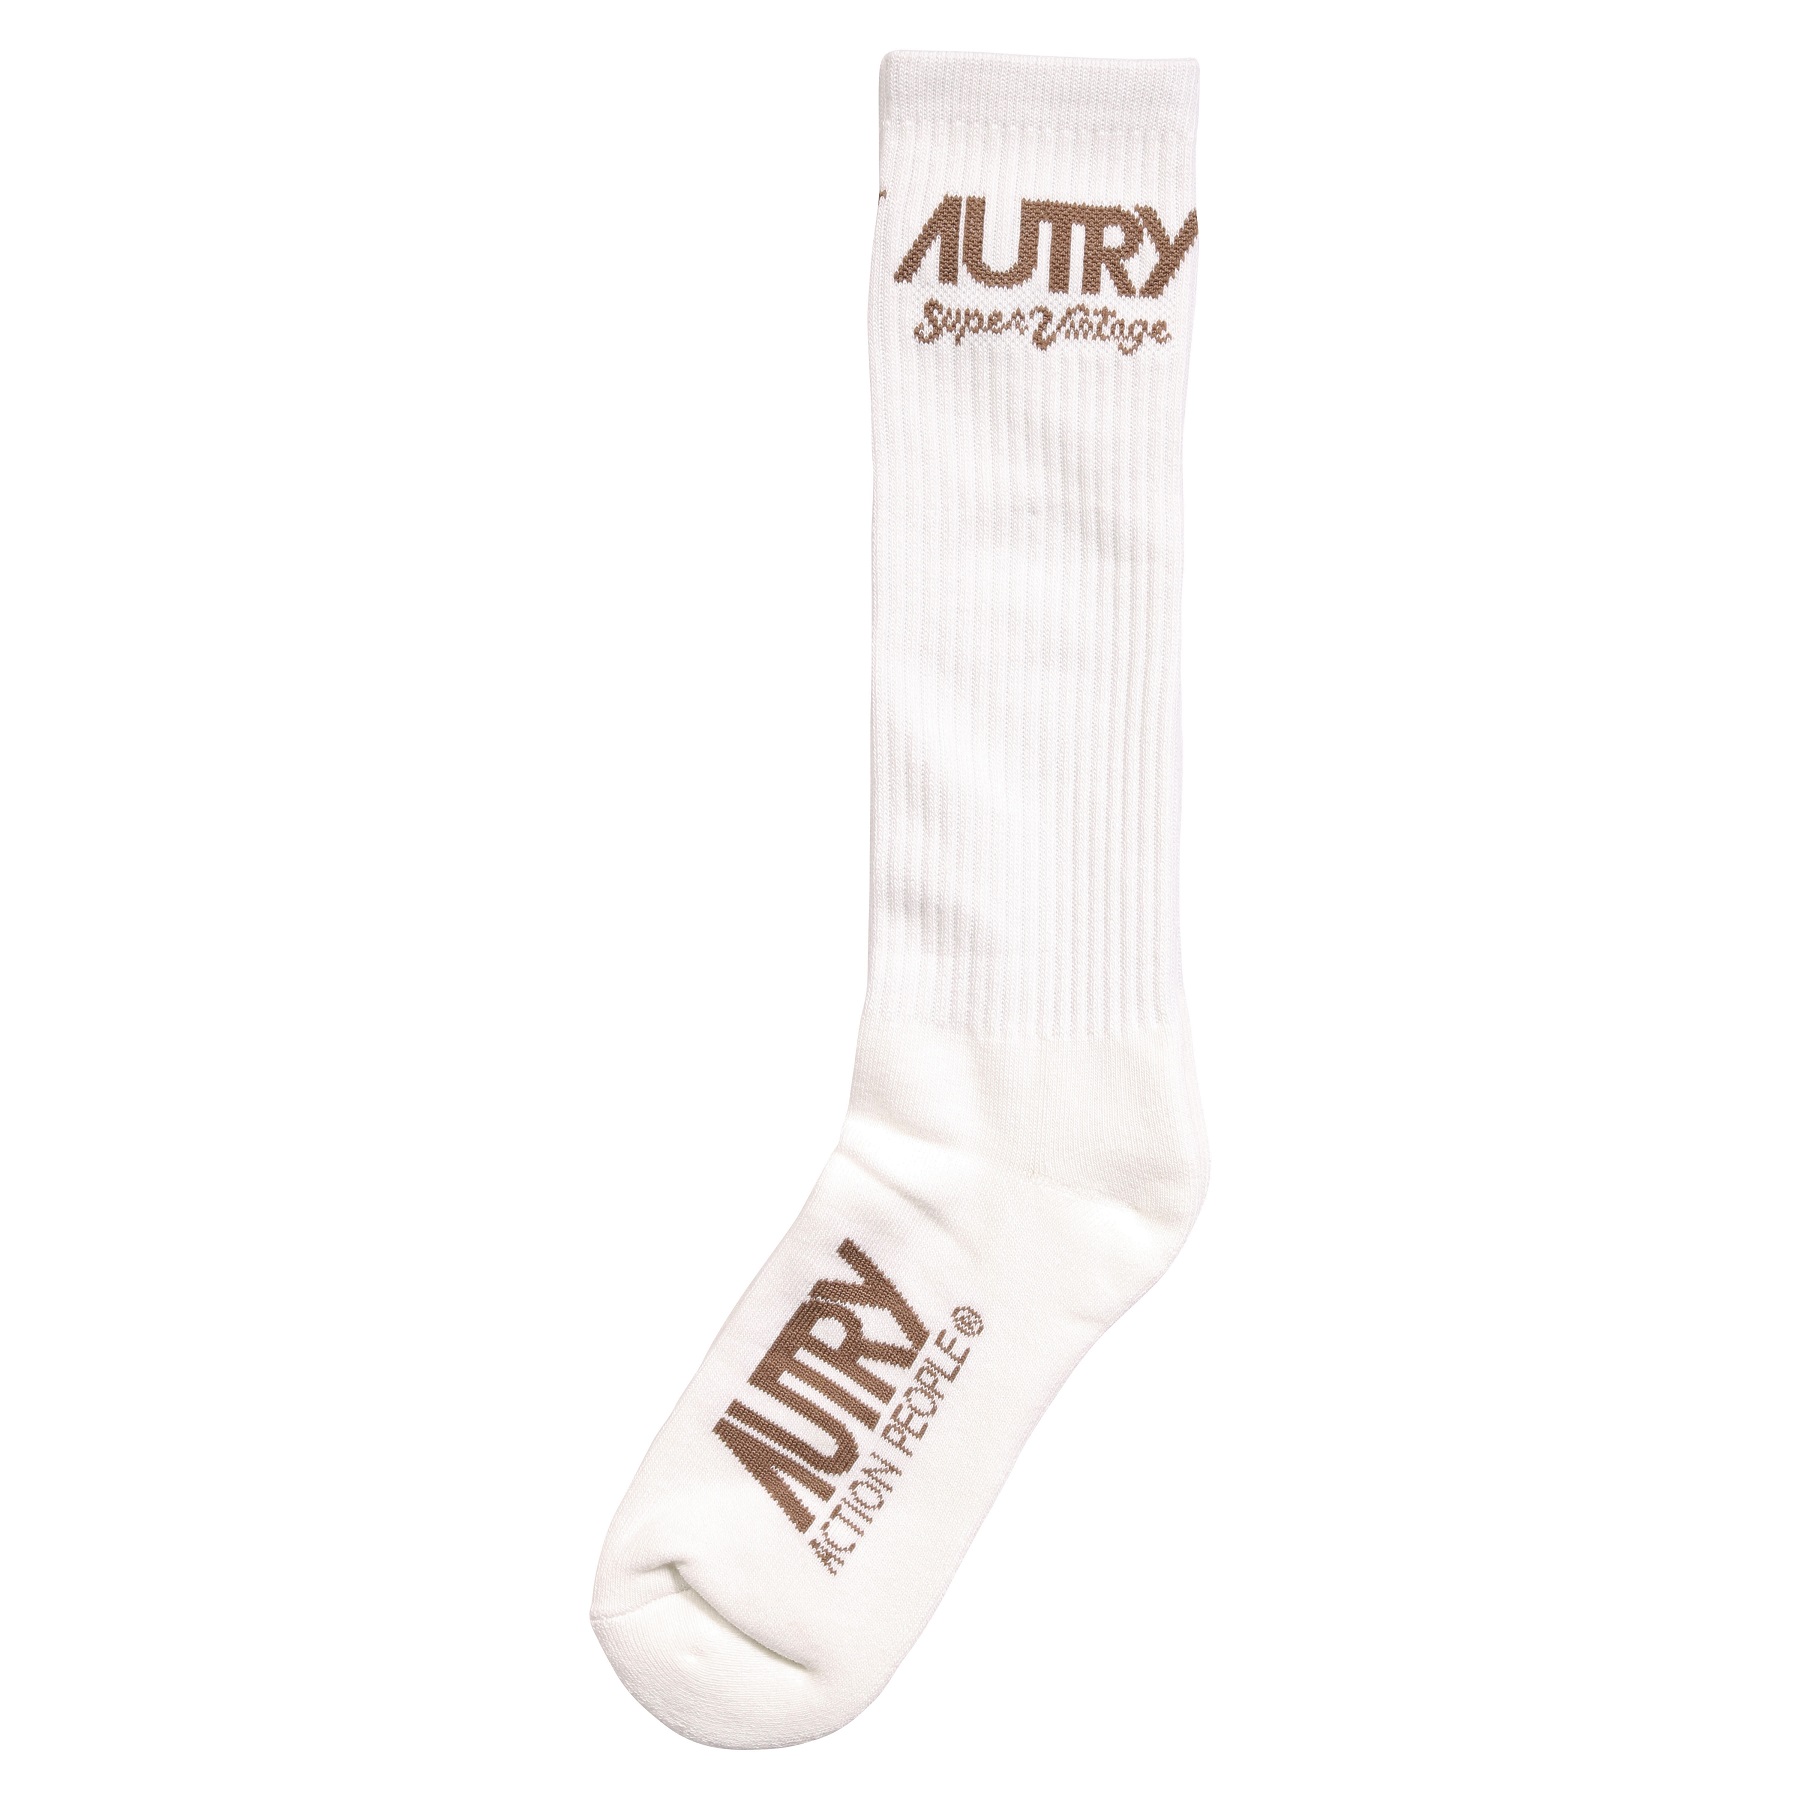 Autry Action Shoes Socks Supervintage Tinto White